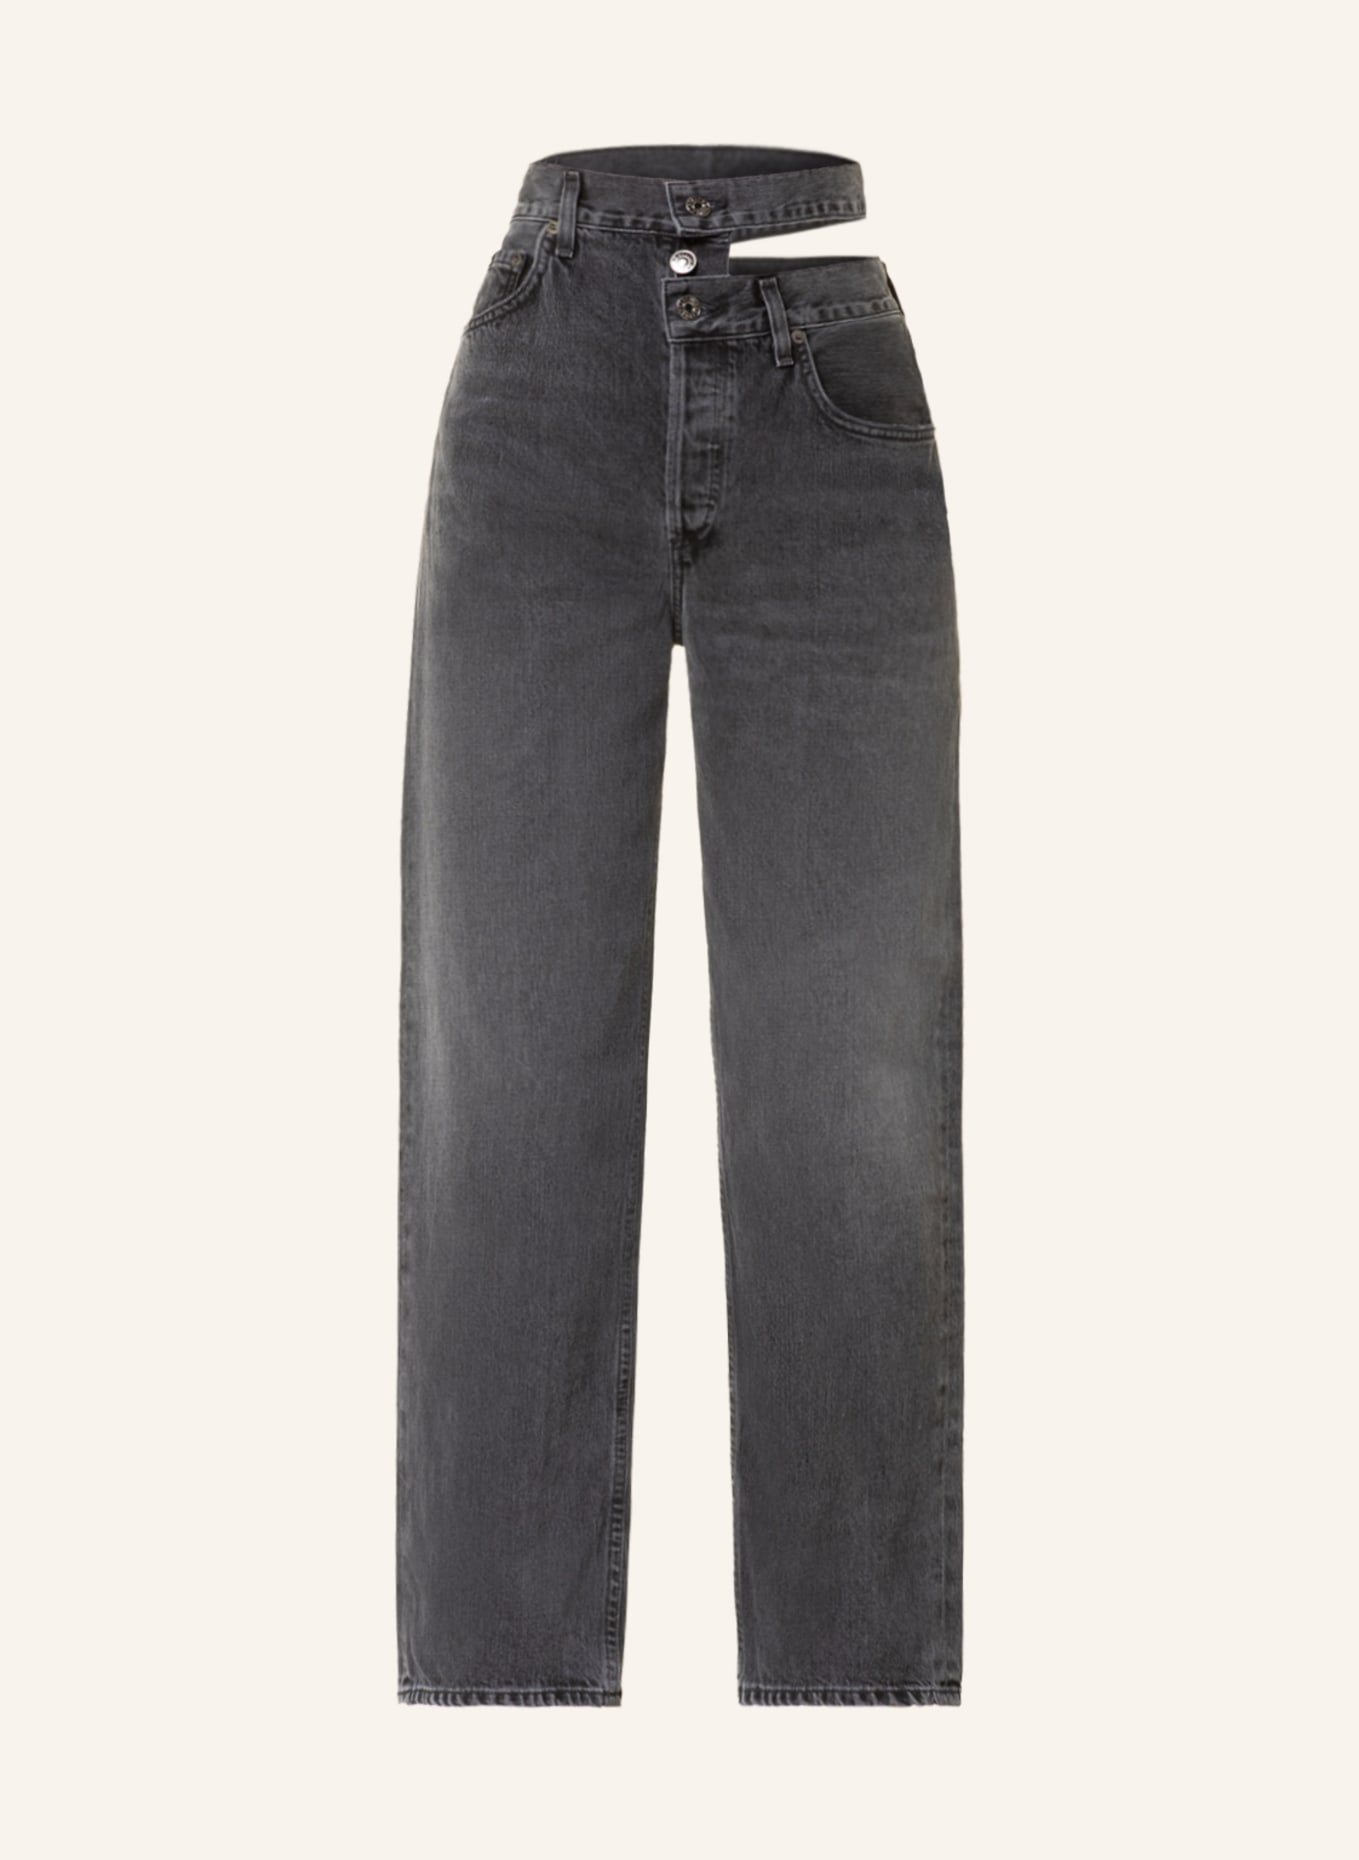 AGOLDE Straight Jeans JEAN mit Cut-out, Farbe: Conduct washed black (Bild 1)